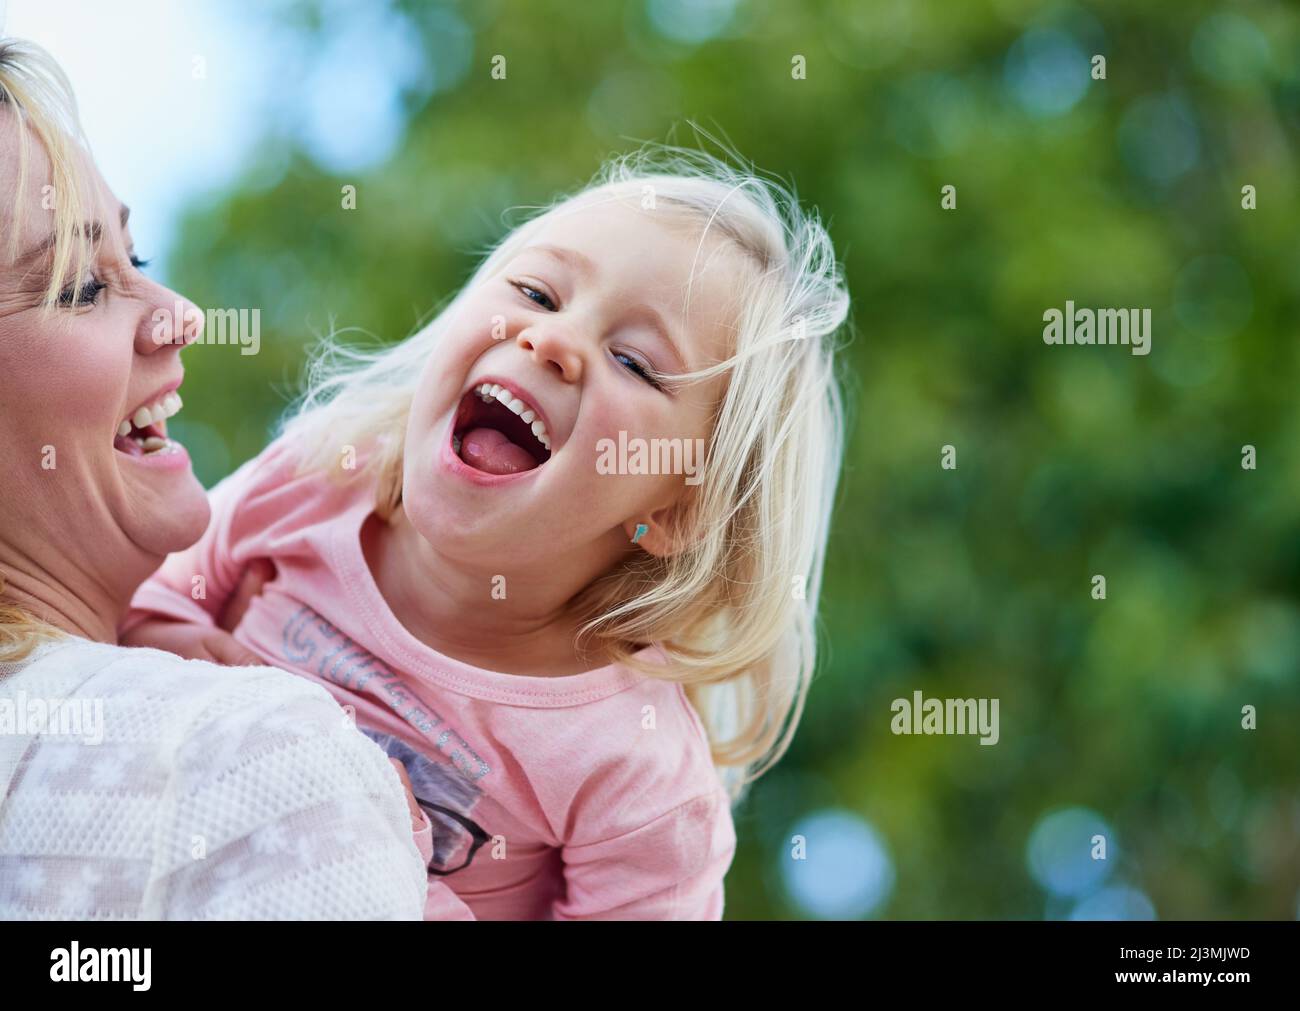 Theres nothing sweeter than a childs laughter. Shot of a cute little girl laughing while being held by her mother outside. Stock Photo